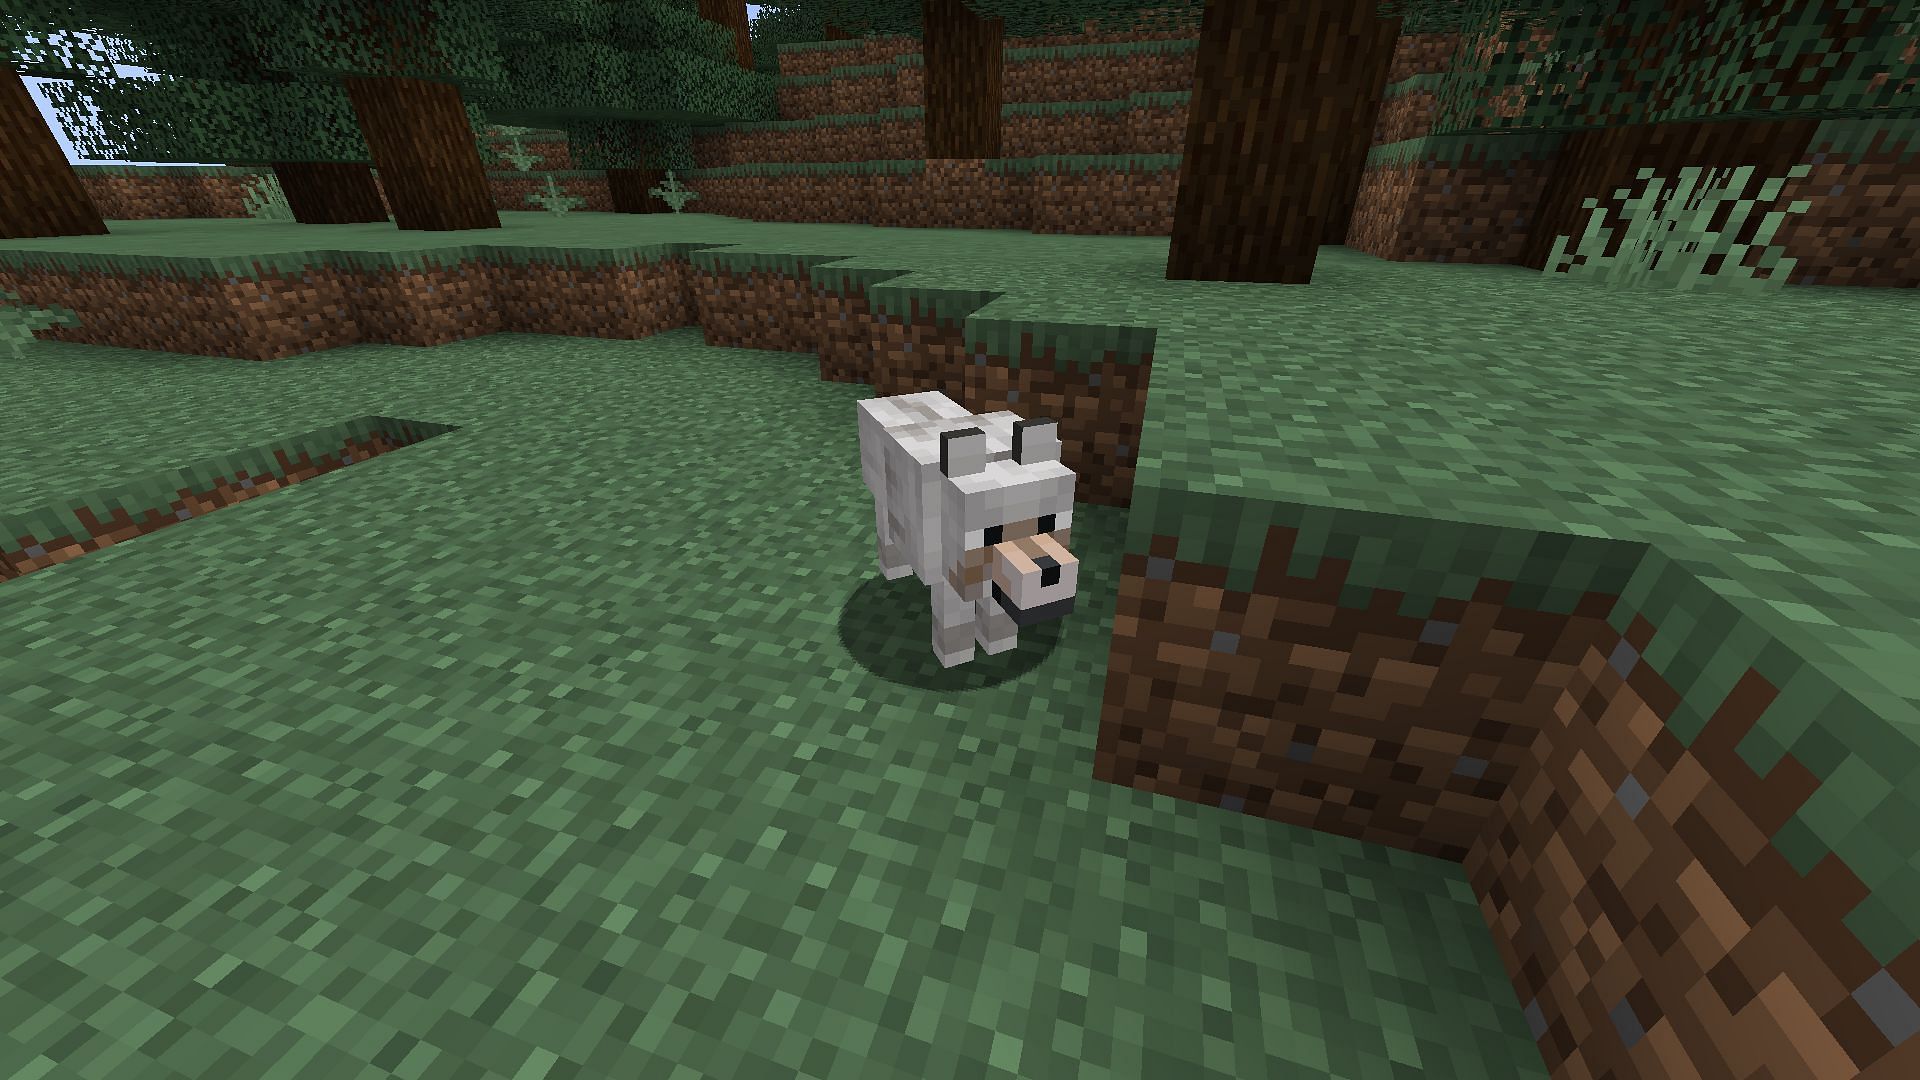 Wolves are the most common pet mob that can be bred using any raw or cooked meat in Minecraft (Image via Mojang)